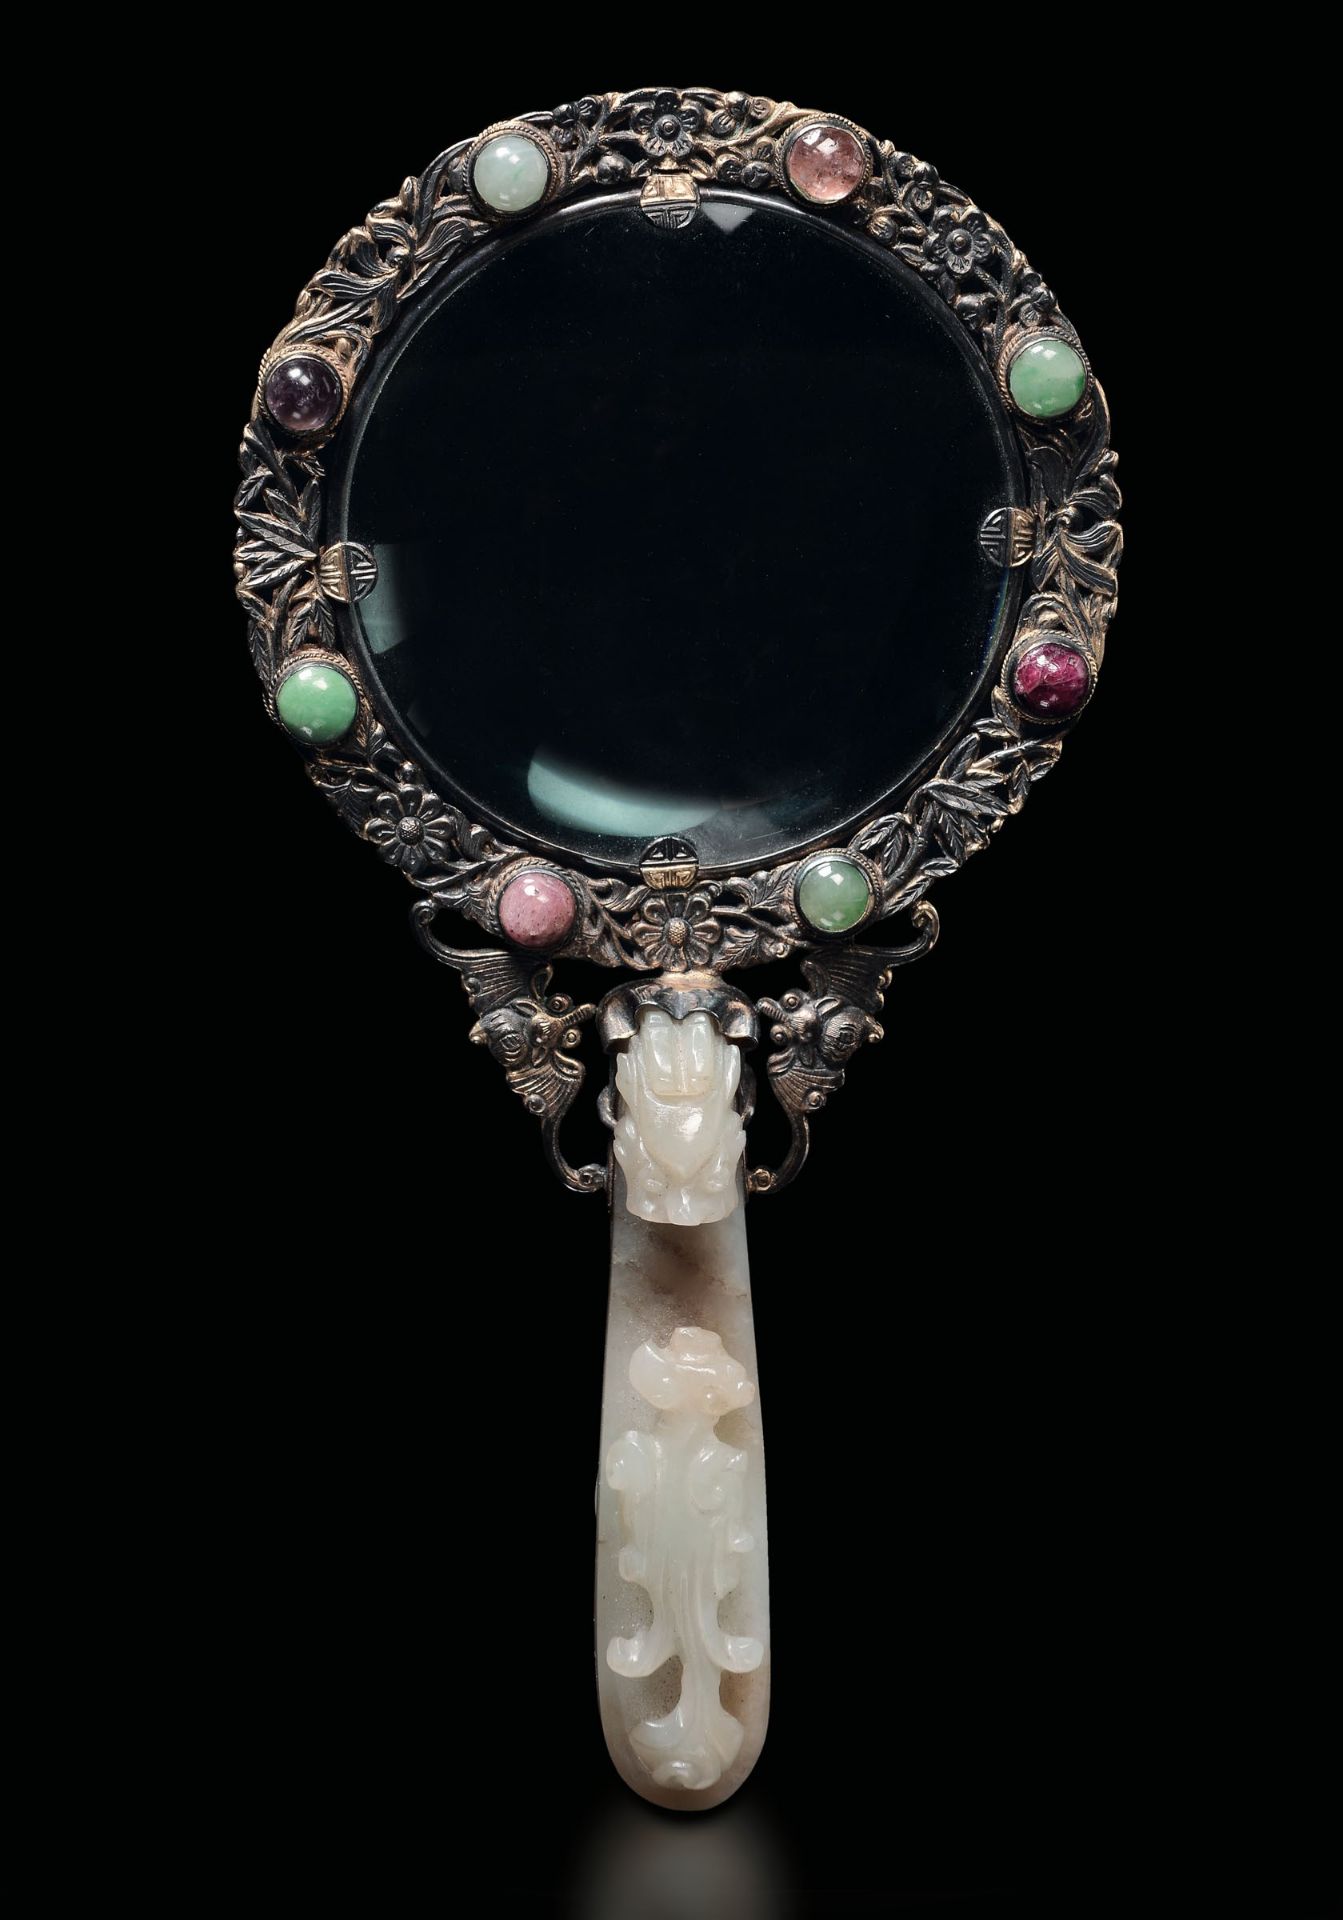 A magnifying glass, China, Qing Dynasty, 1700s - A magnifying glass with the handle [...]